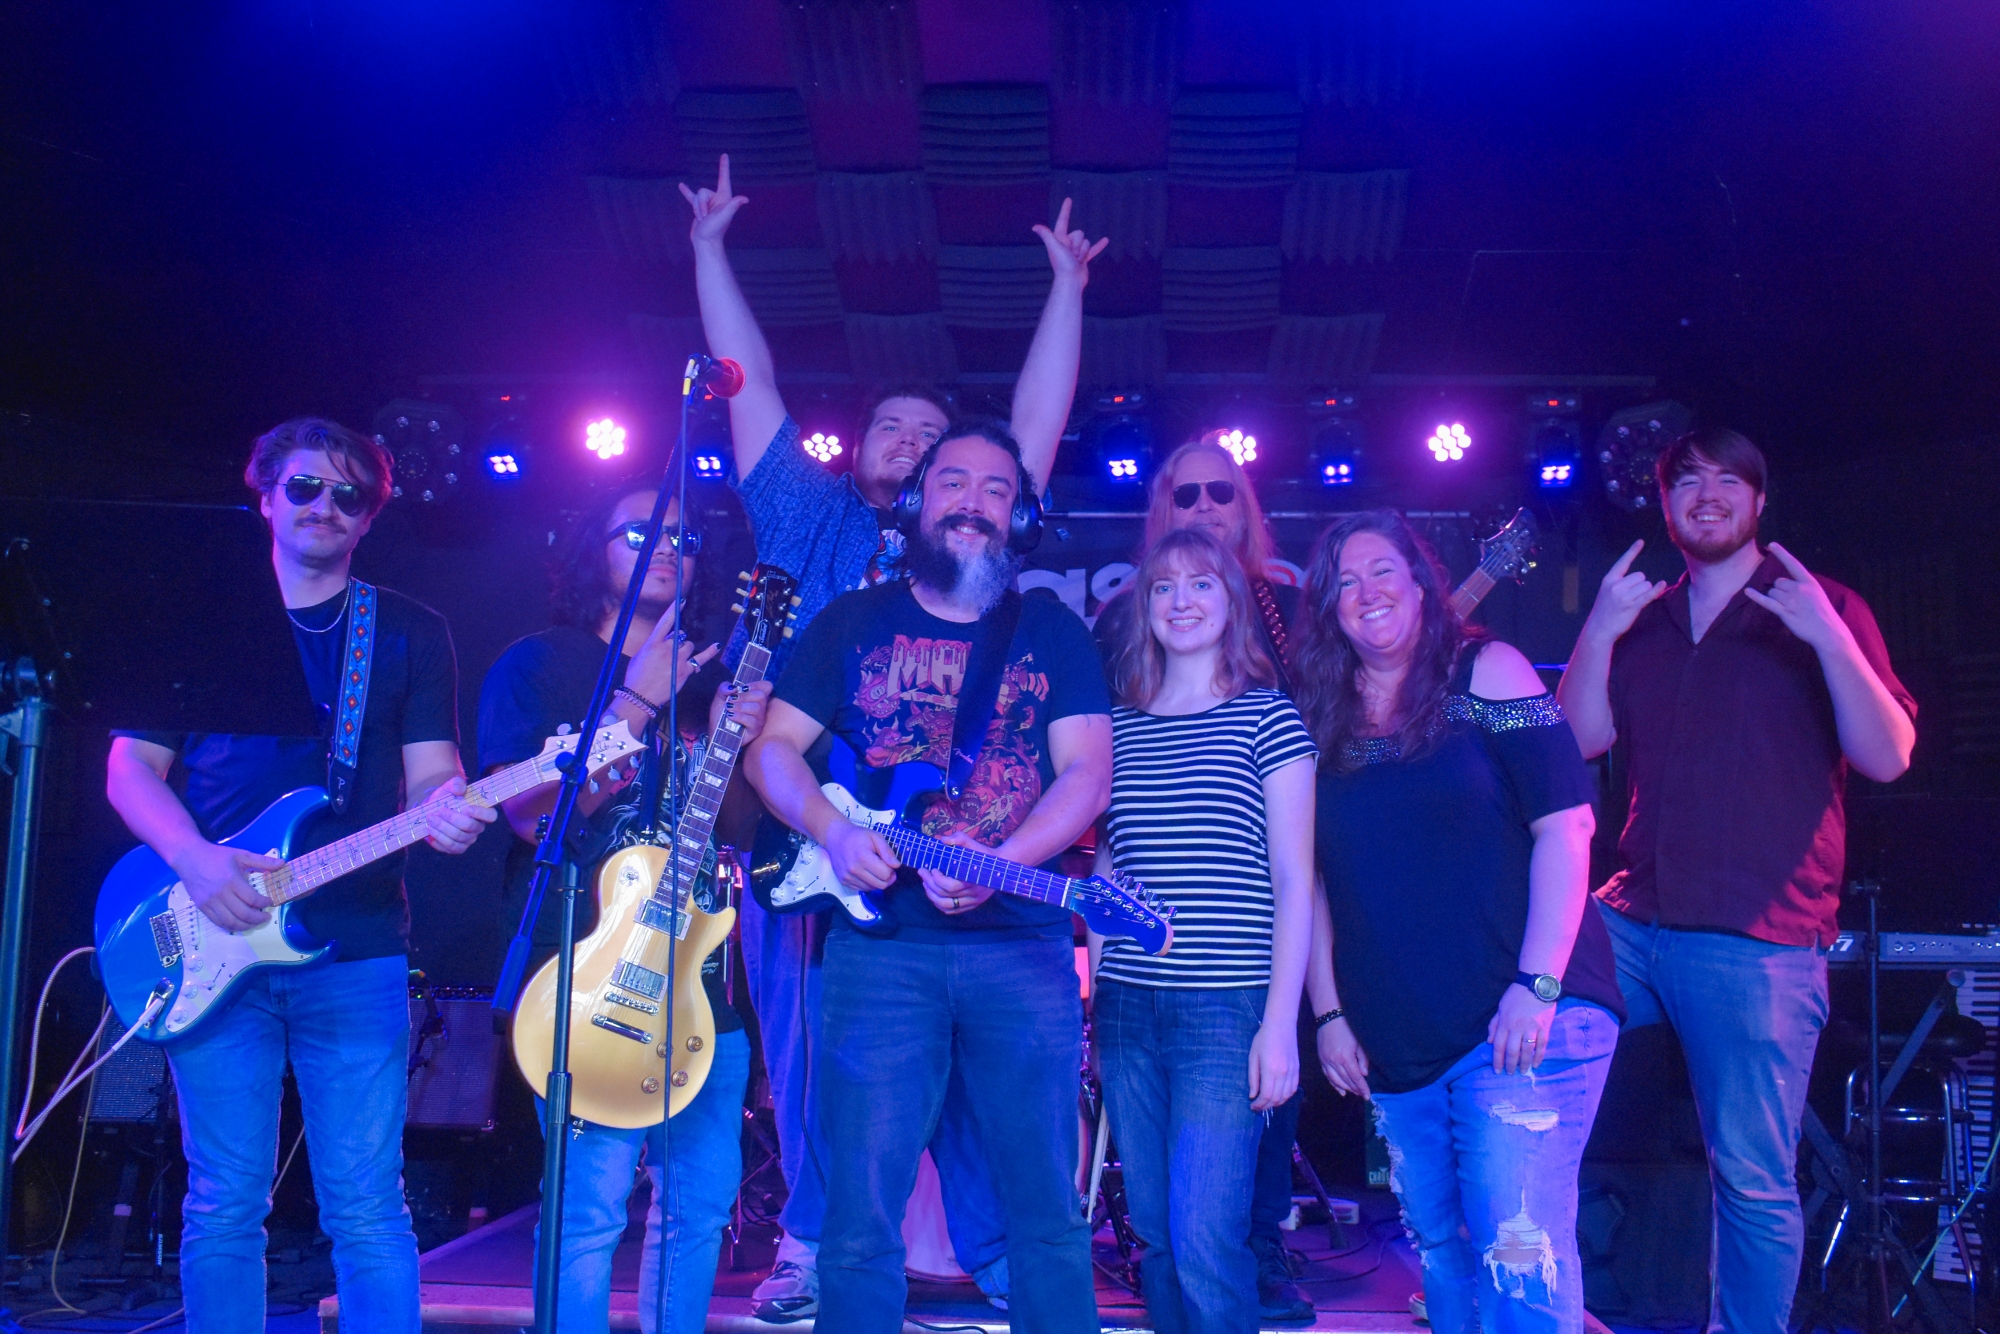 Adults can Rock with us too! Here's a shot of our Adult Band at a recent showcase!